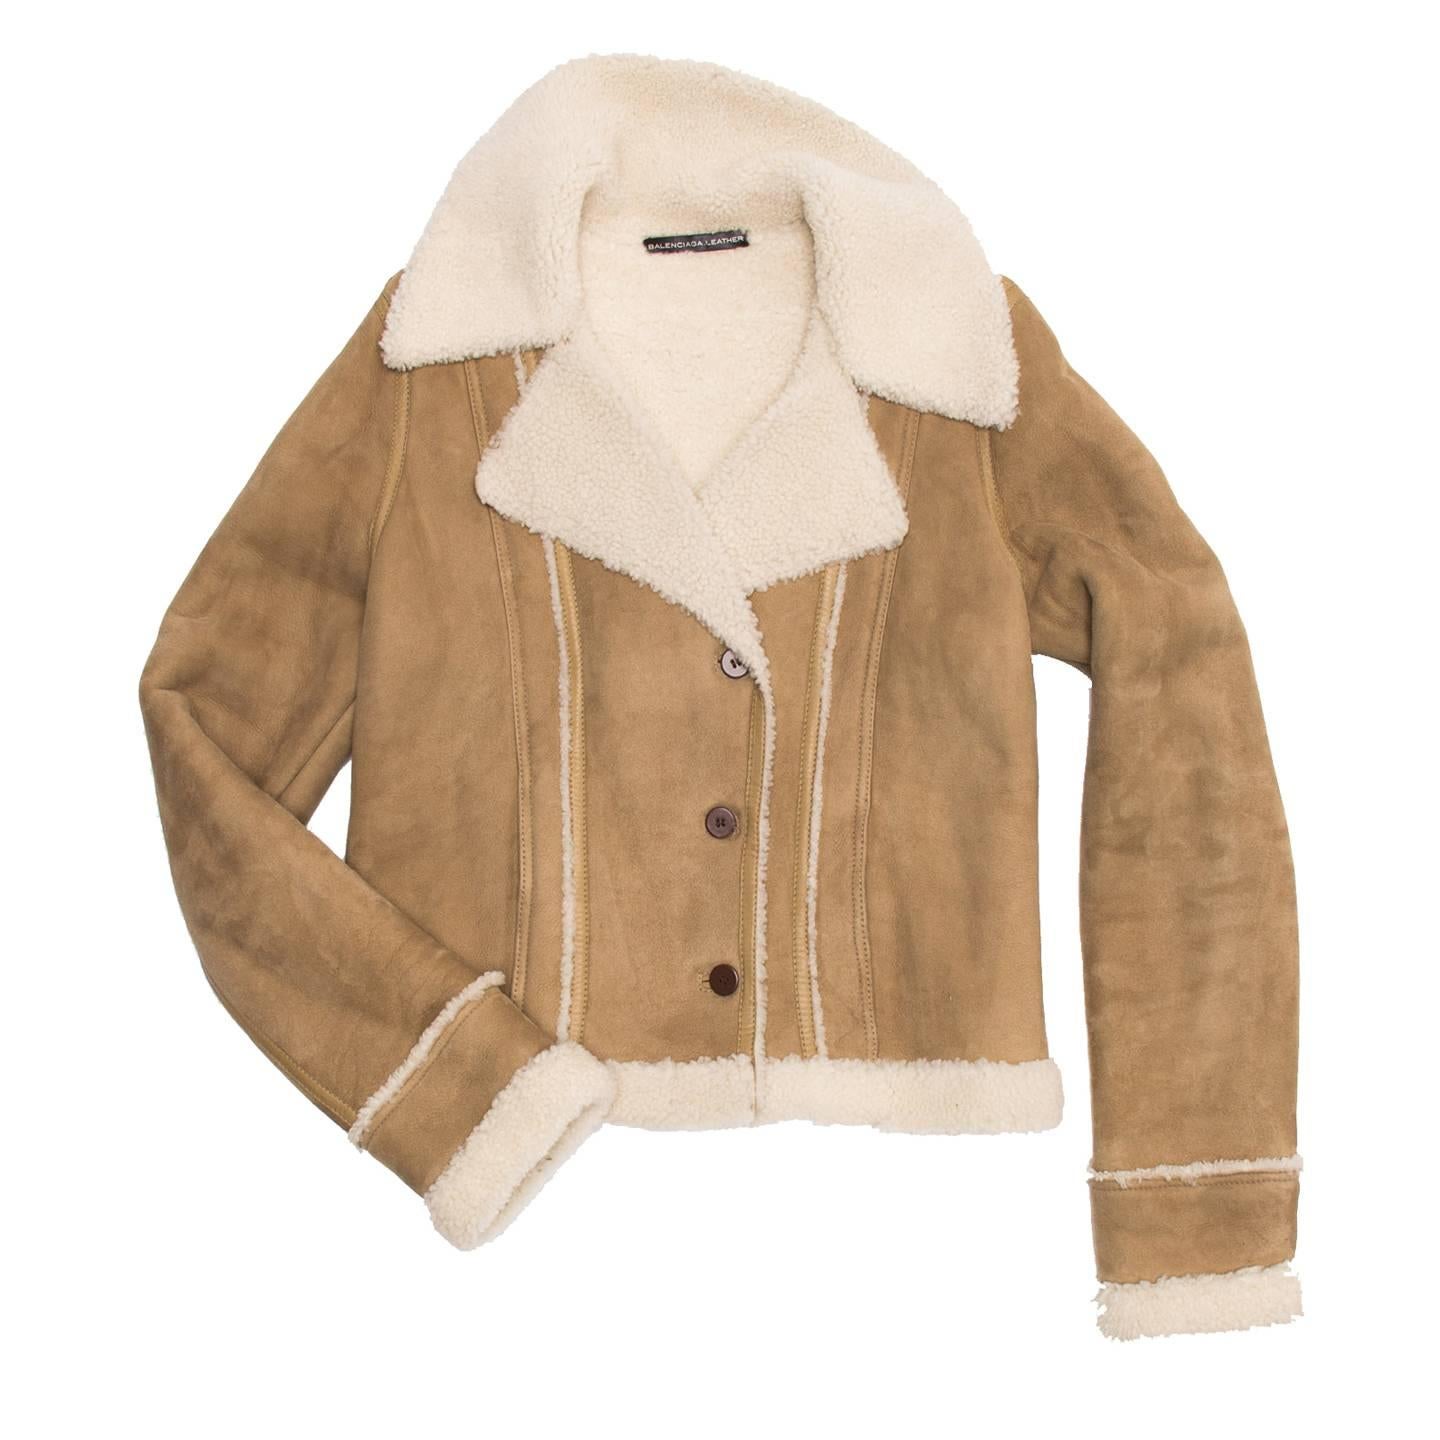 Lambskin suede cropped jacket with shearling lining, collar, cuffs, hem and seam details. The fit is quite tight thanks to the front and back darts that are emphasized by a leather tape and white shearling. The front has a small double breast